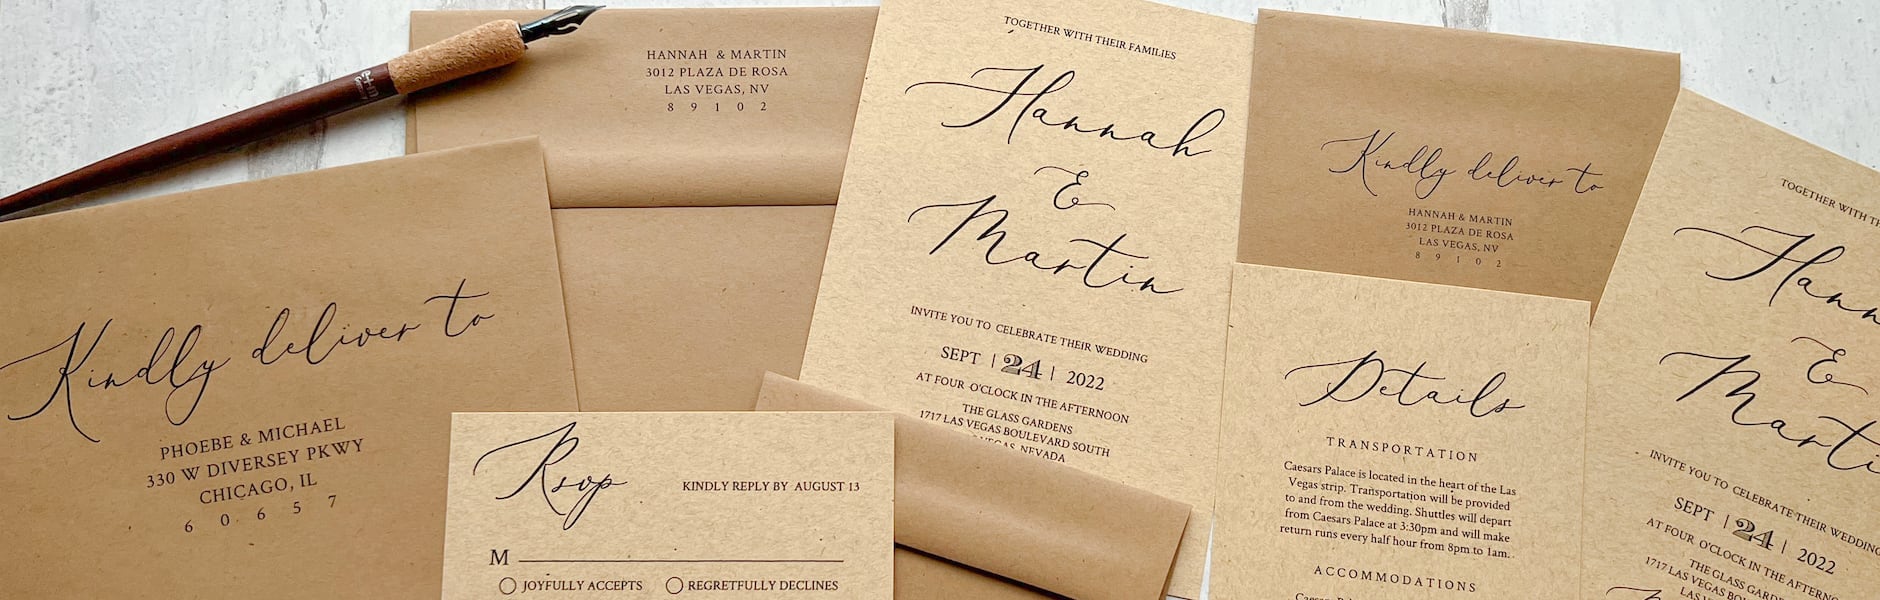 Brown Kraft Paper Cardstock Sheets for Invitations Menus Crafts (8.5 x 11 in 50 Sheets)